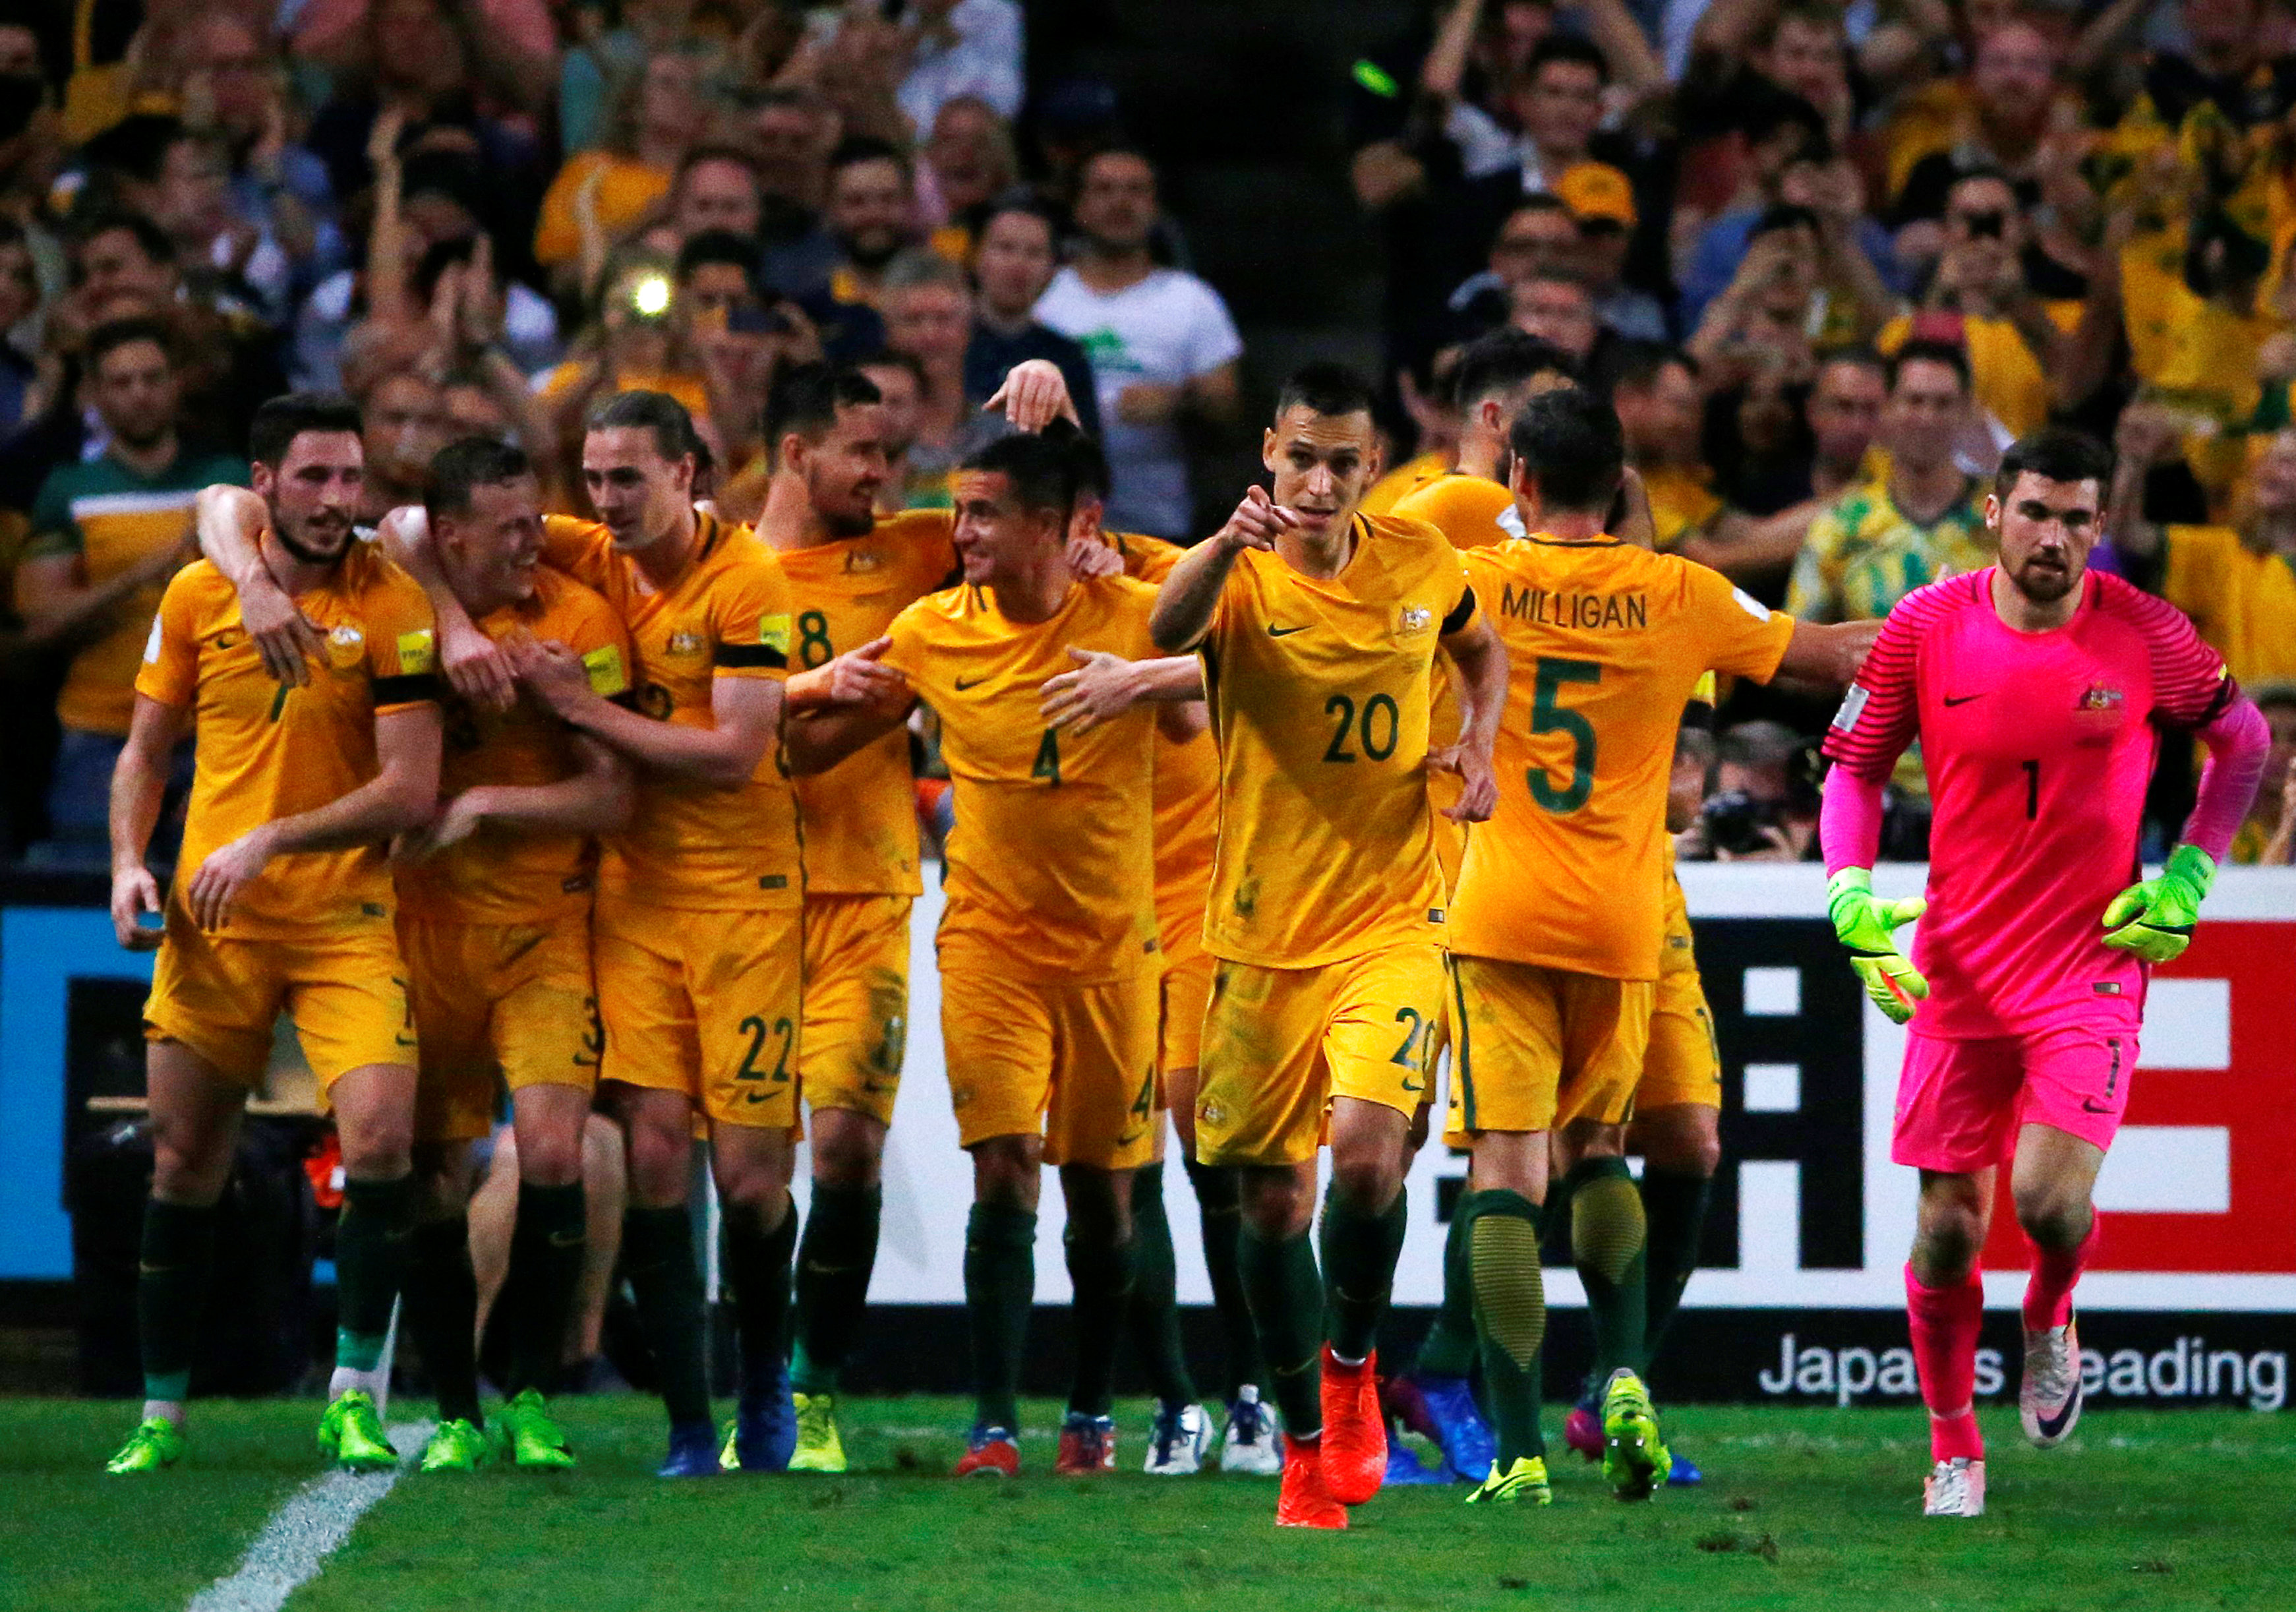 Football: Australia end run of draws with 2-0 victory over UAE